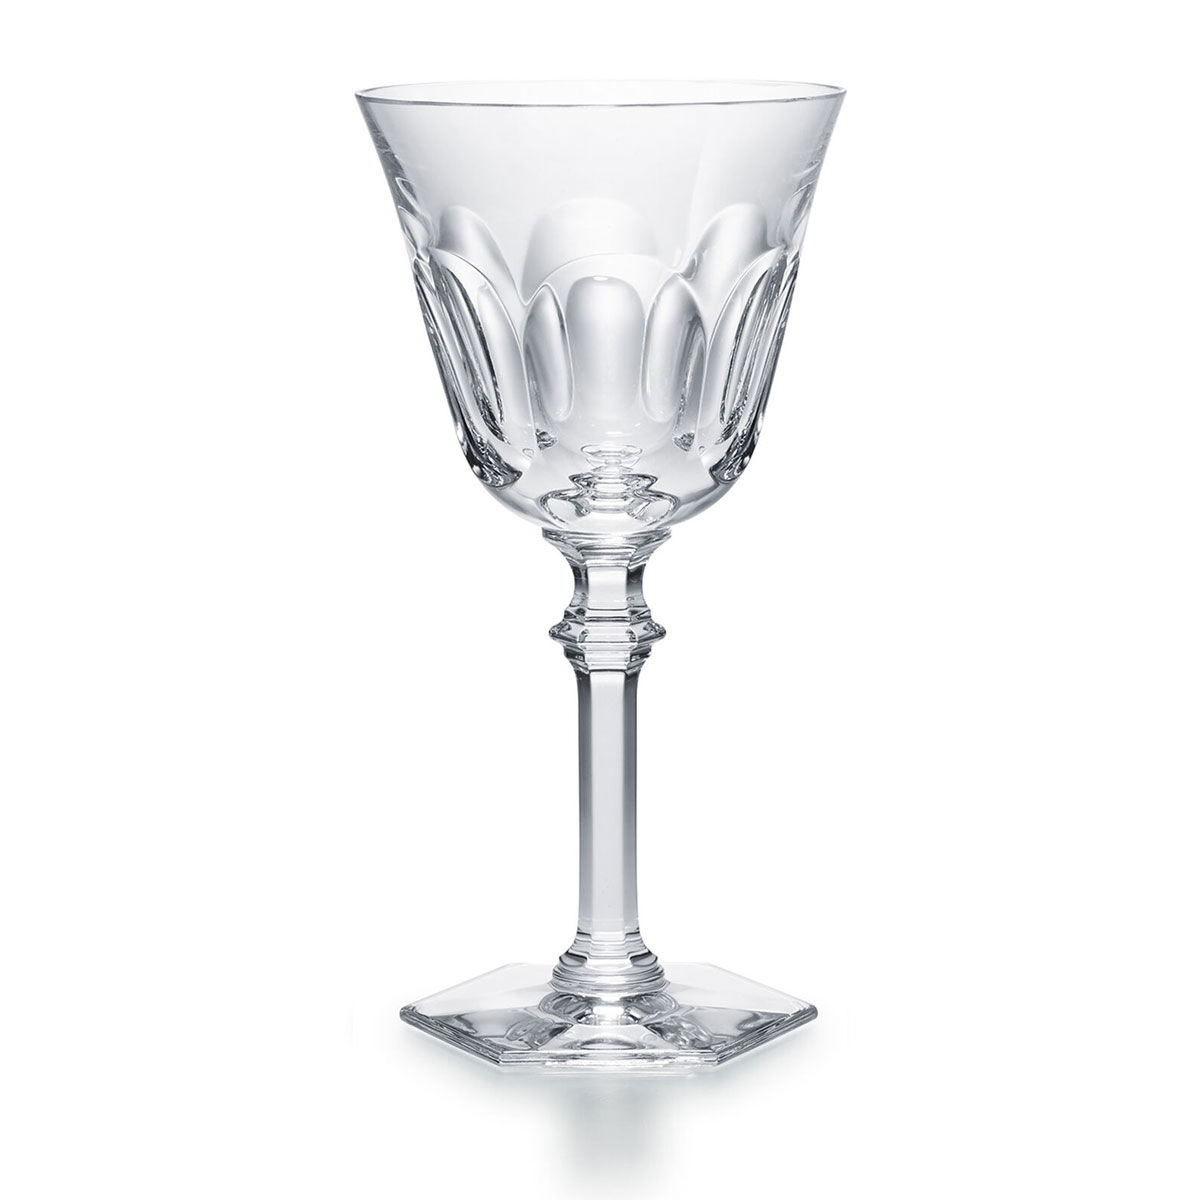 Baccarat Crystal, Harcourt Eve American Water Glass, Single